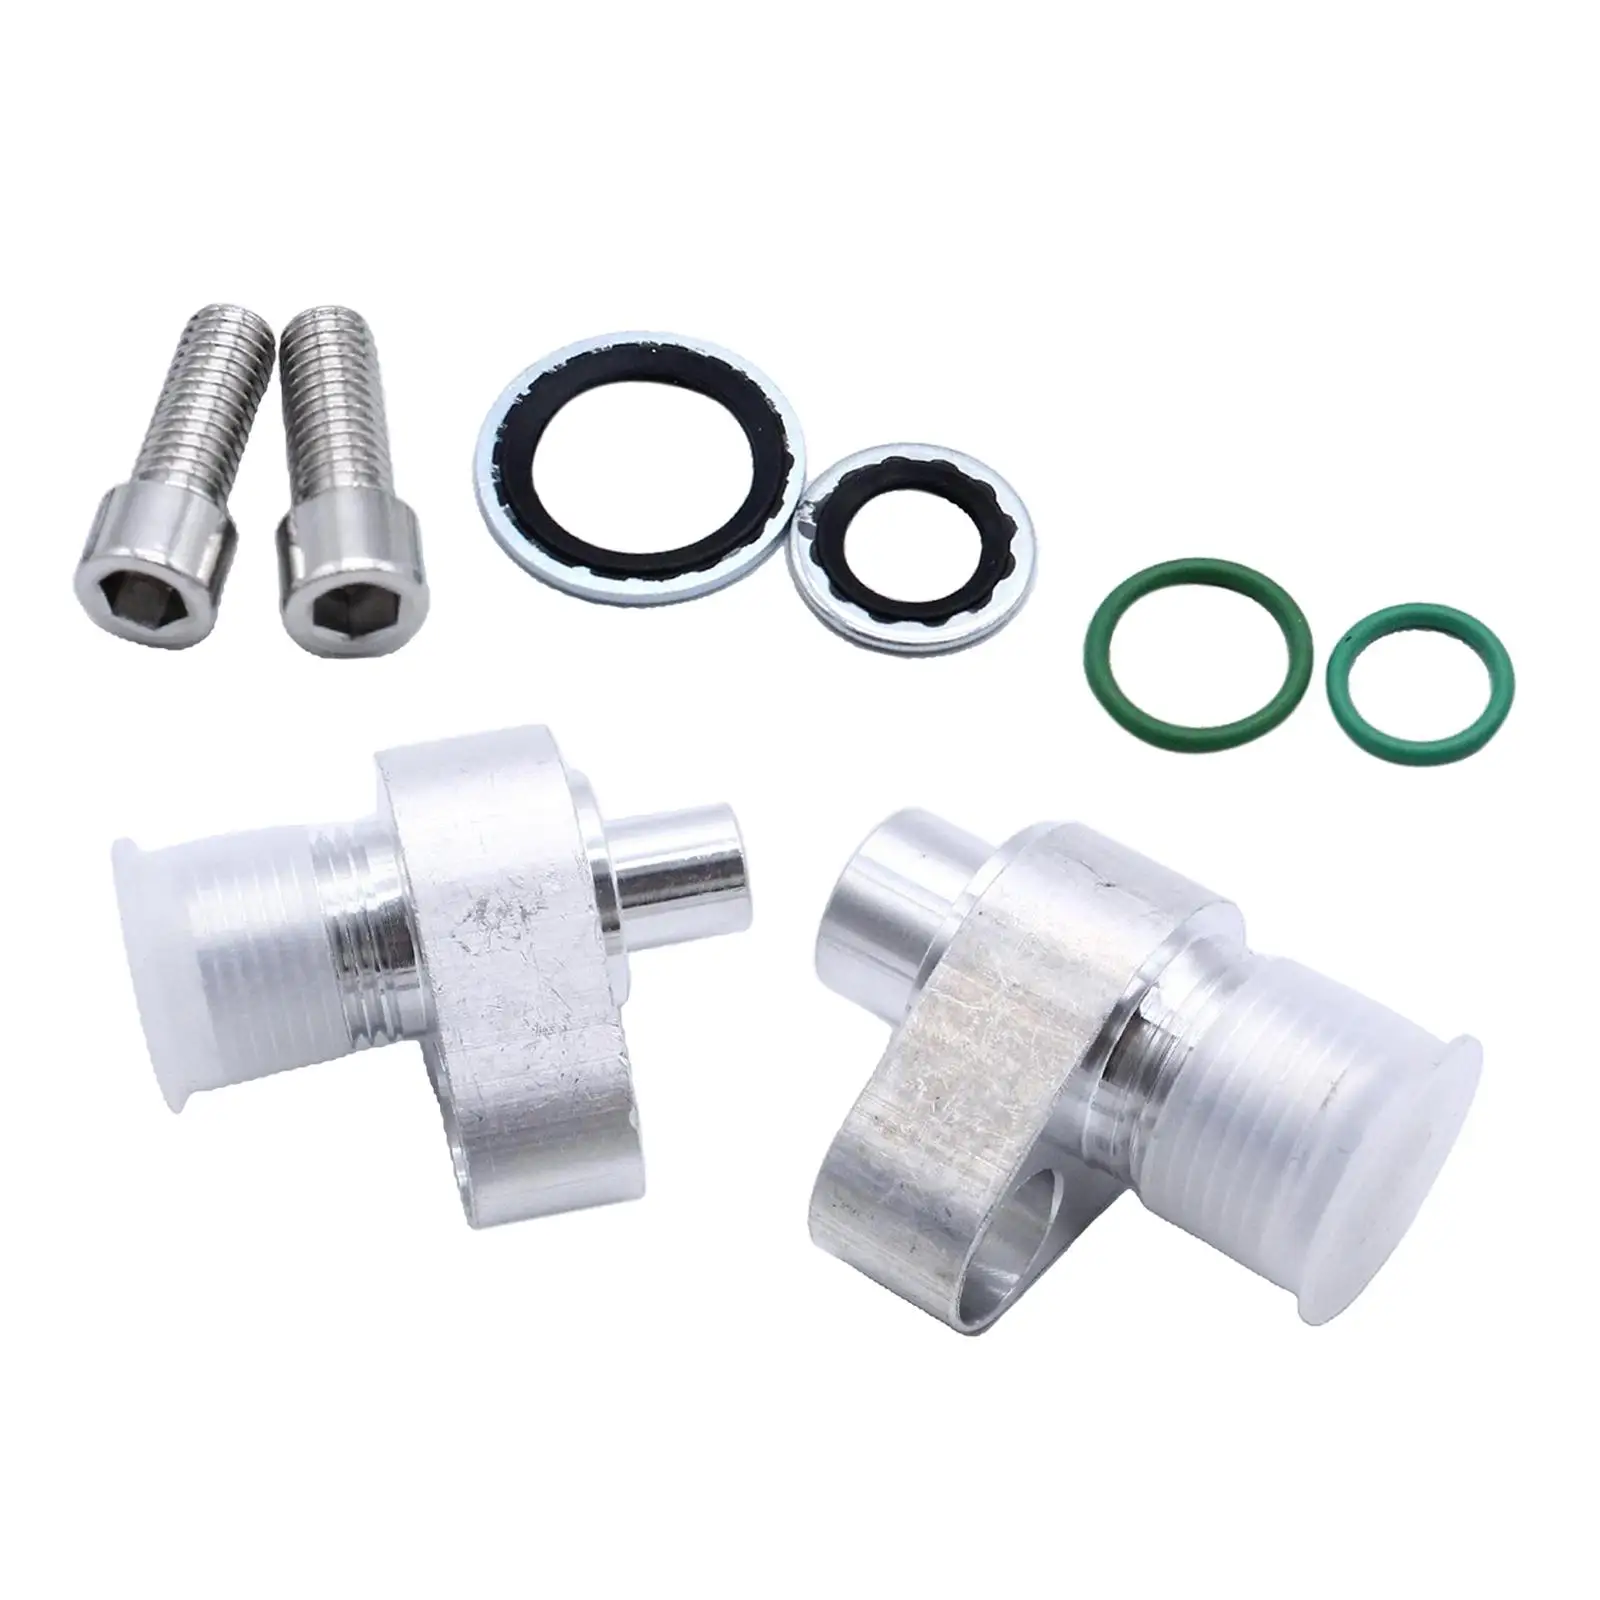 451-1105 440-823 451-1106 DS345061 Parts  cessories W10SA   Compressor Connector Adapter Fittings for Denso 10S20F 10S17F